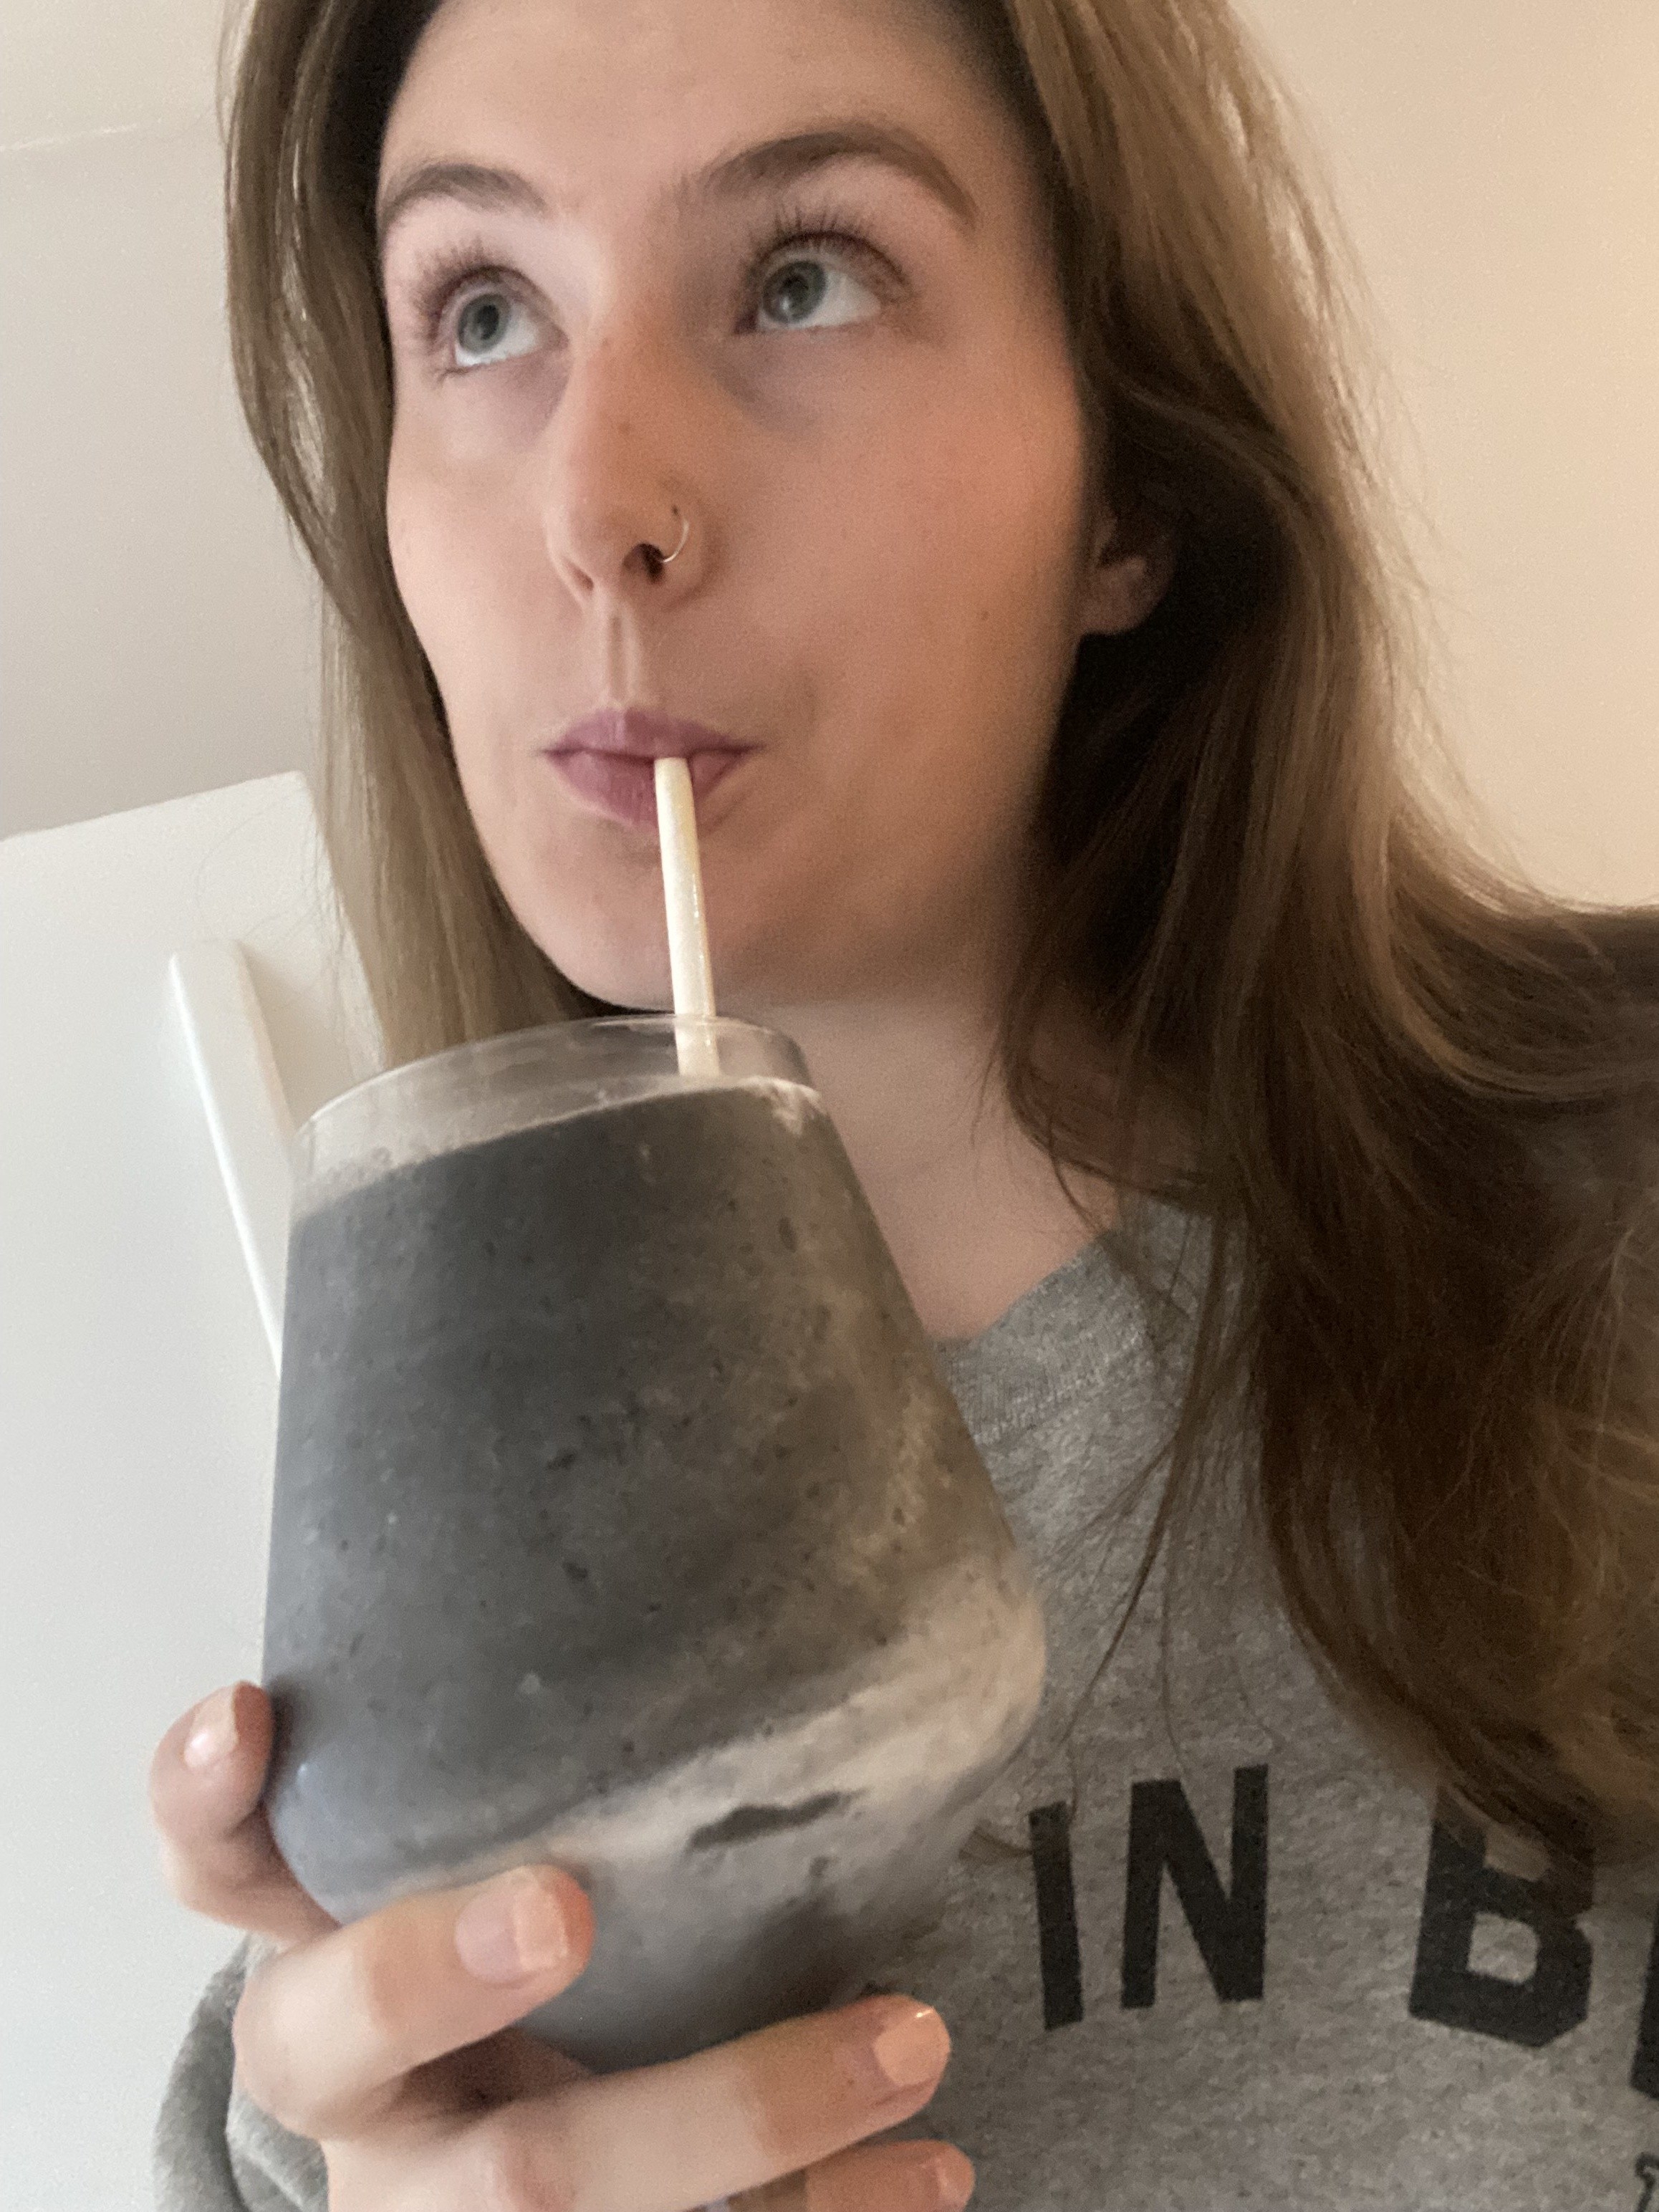 The writer drinking her smoothie